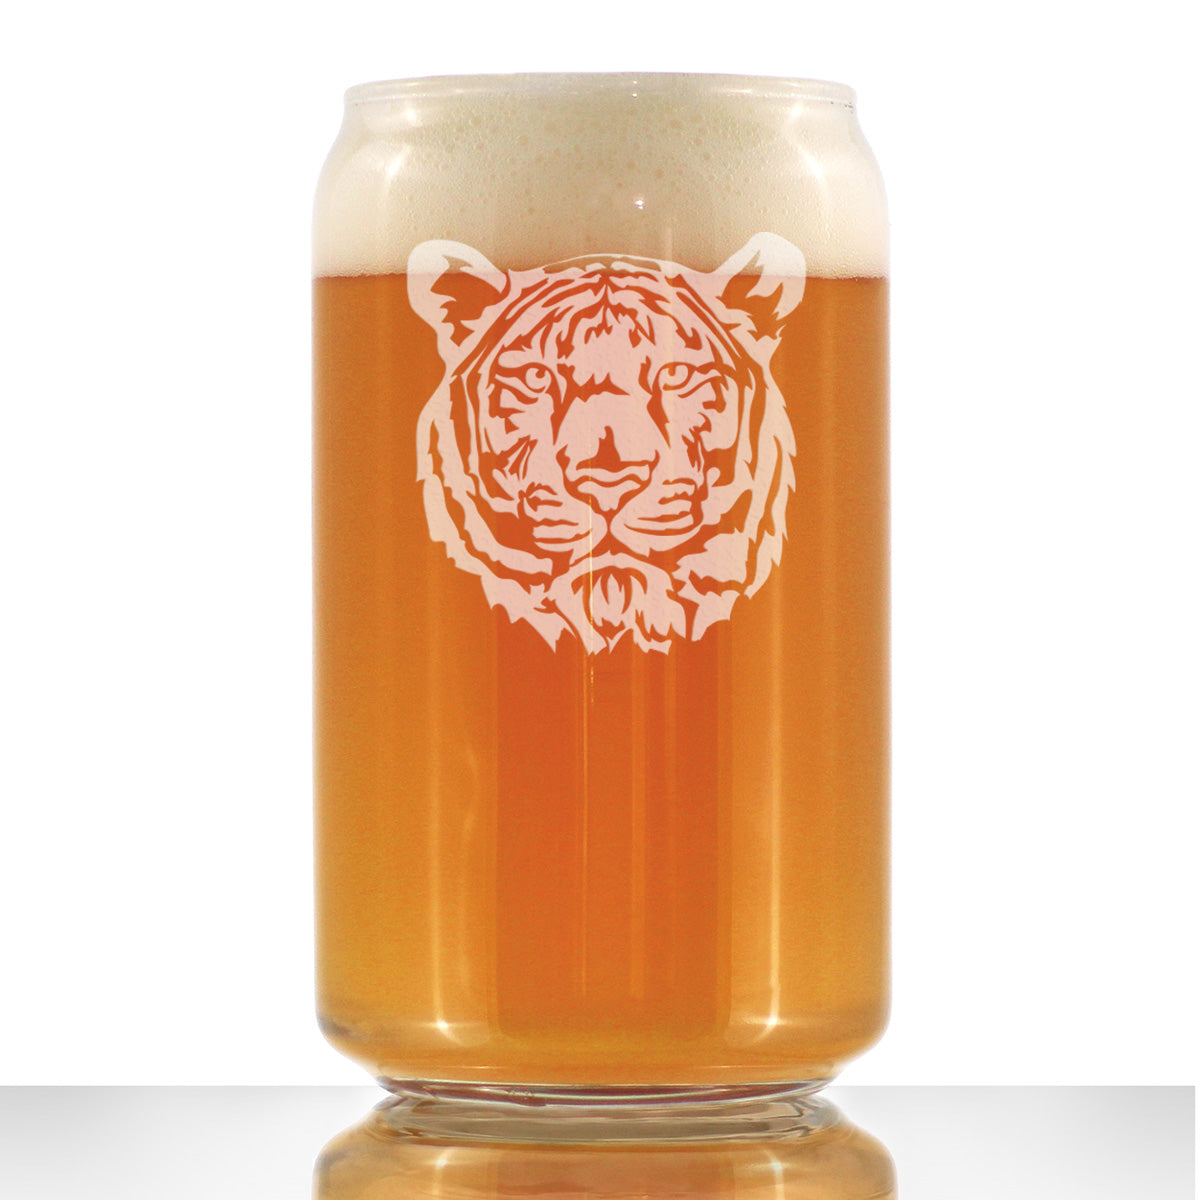 Tiger Face Beer Can Pint Glass - Unique Tiger Themed Decor and Gifts for Animal Lovers - 16 Oz Glasses